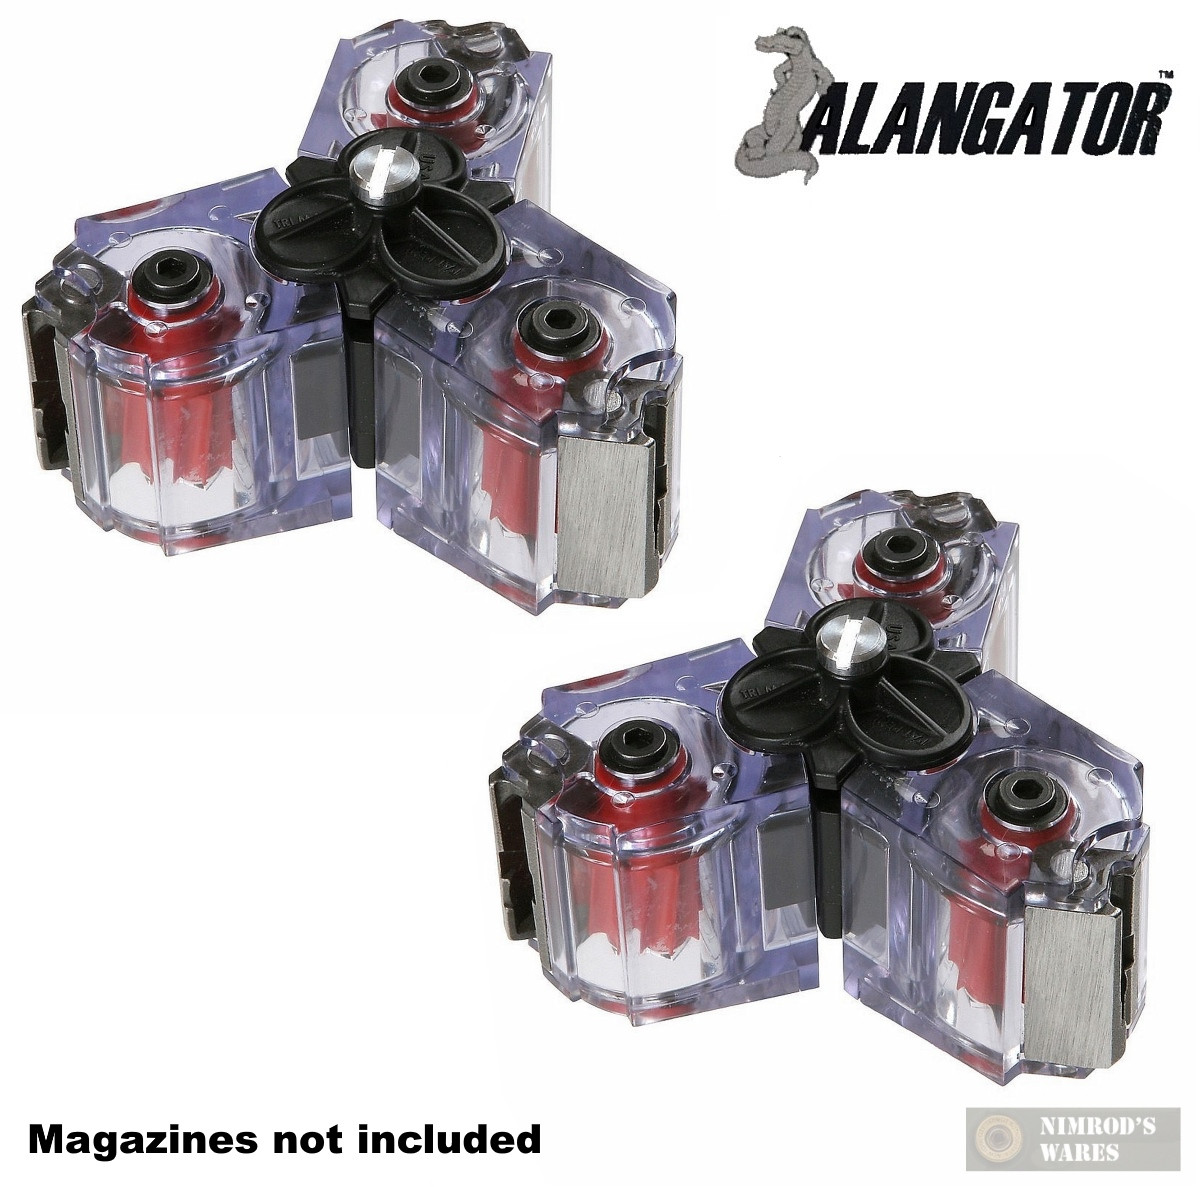 2 Pack Fits Ruger Magazine Alangator Trimag 10/22 10 22 Mags 10 rd & DUST CAPS! 